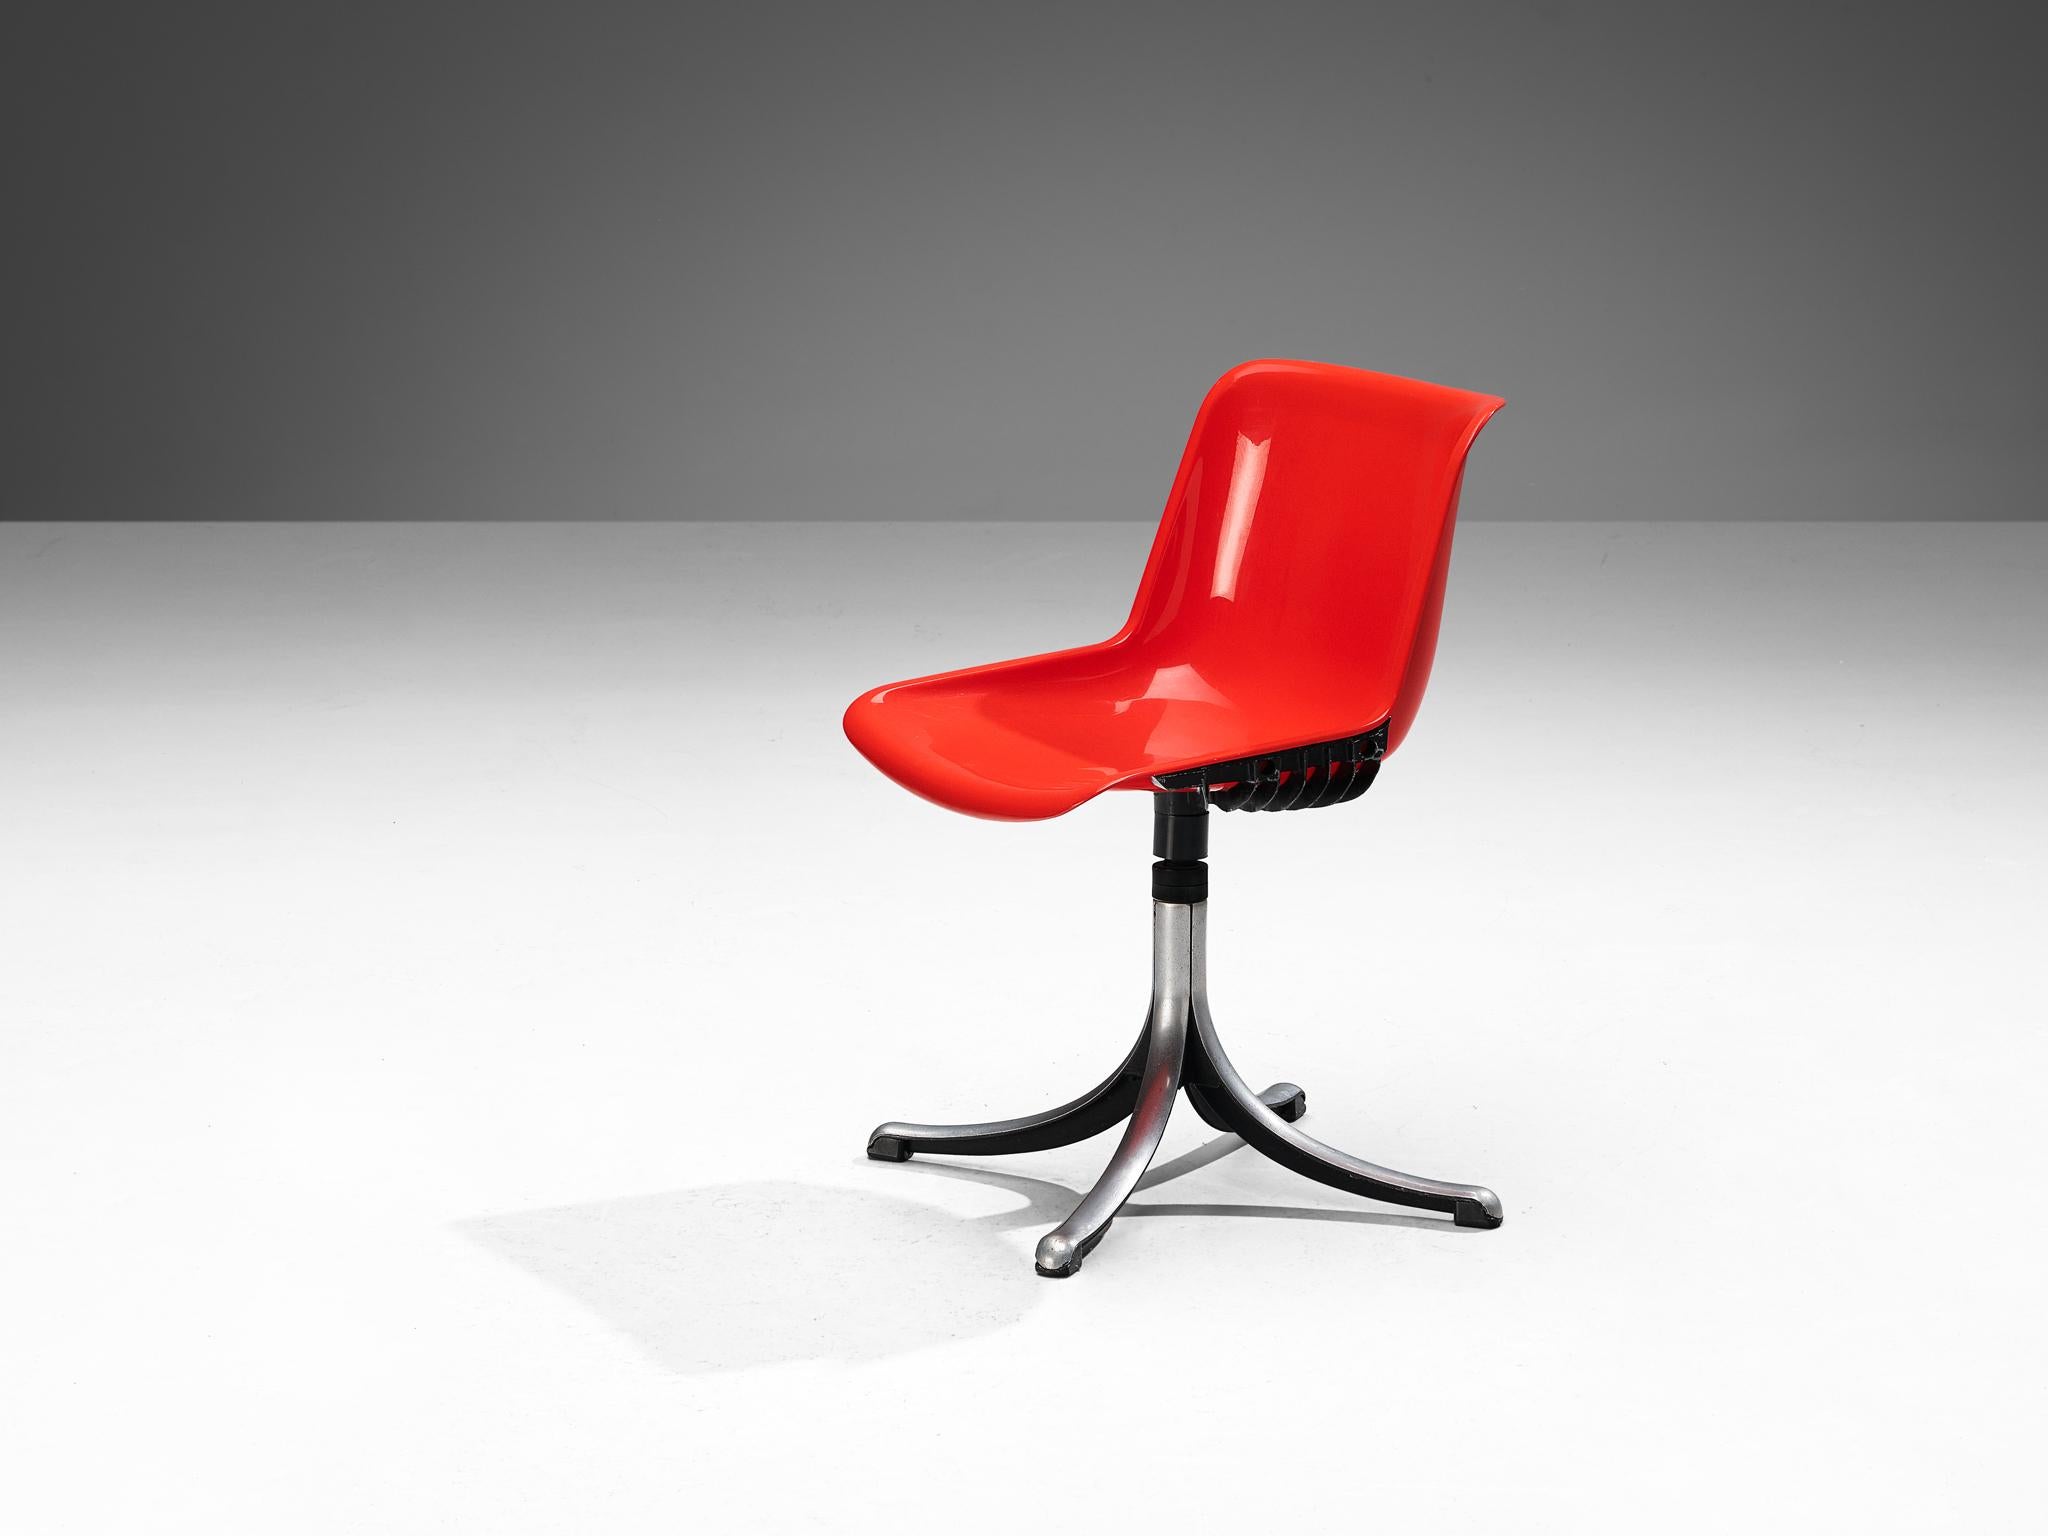 Centro Progetti Tecno, desk chair, model ‘Modus', nylon / plastic, aluminum, Italy, production 1973

Highly functional office chair designed by Centro Progetti Tecno that is part of the Modus seating system, the first project to initiate by CPT. The